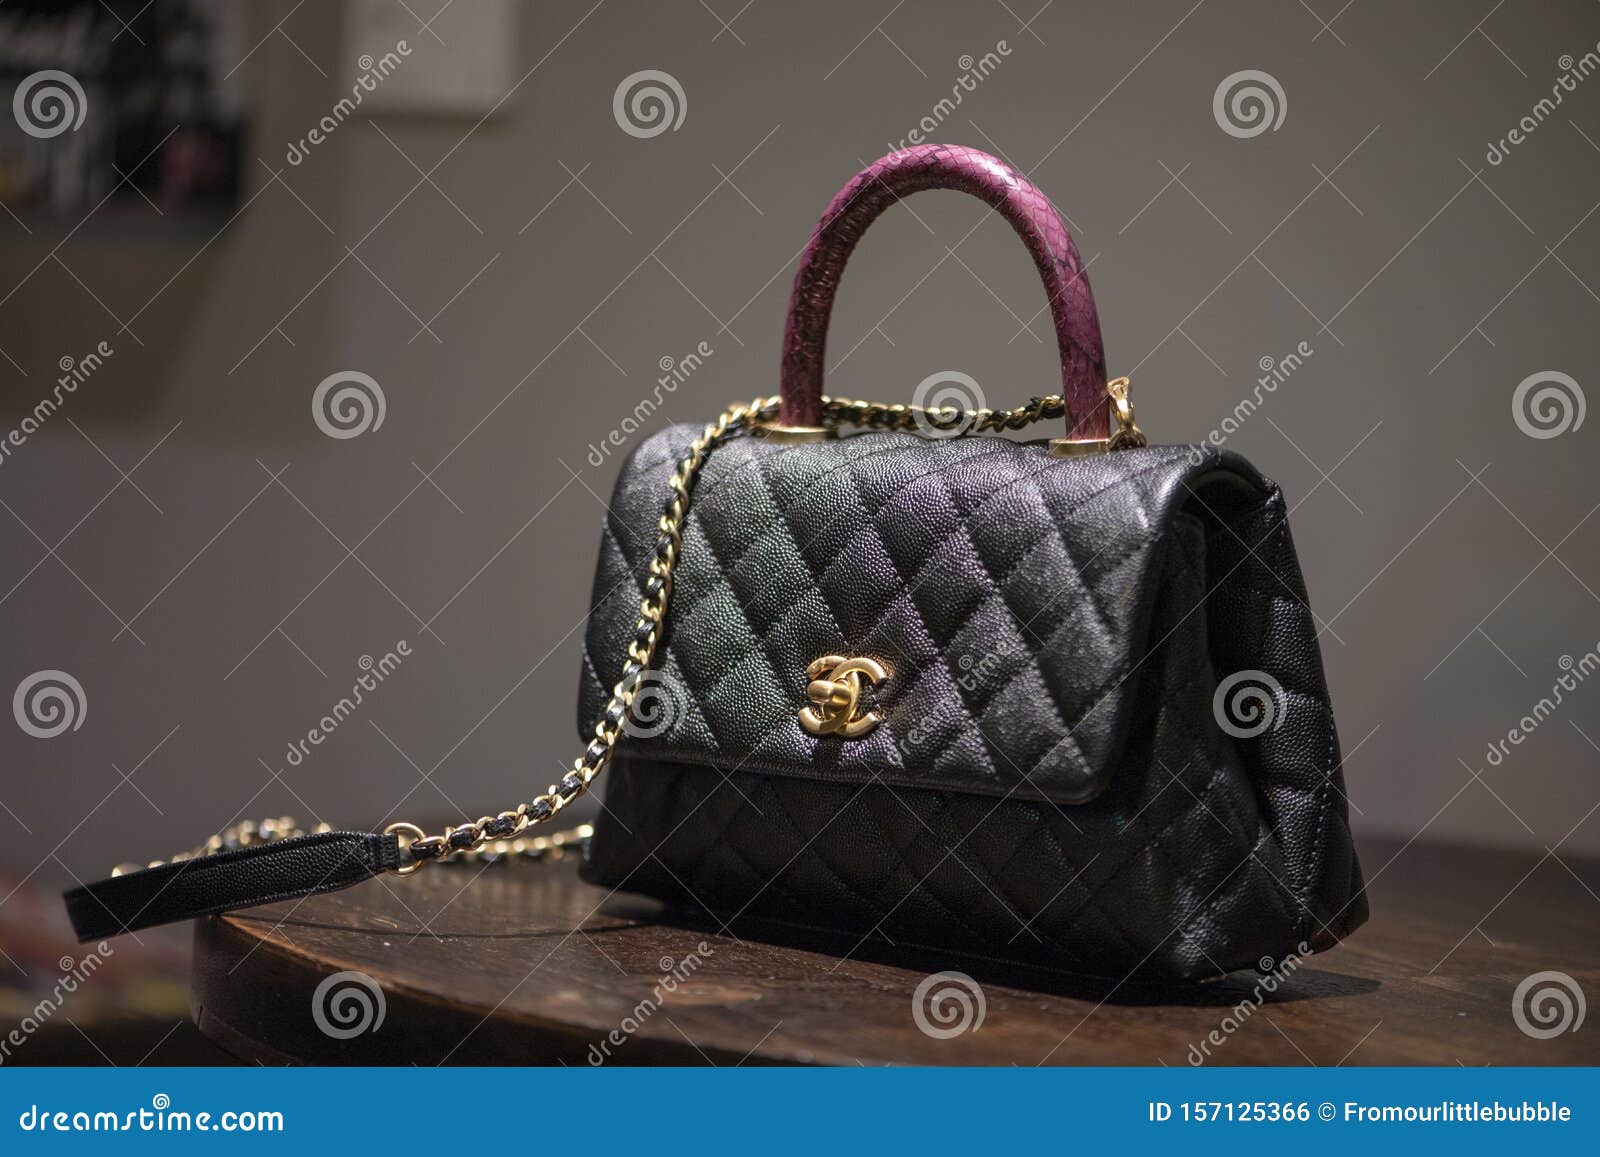 Authentic Chanel Bag Sitting on Table Editorial Photo - Image of